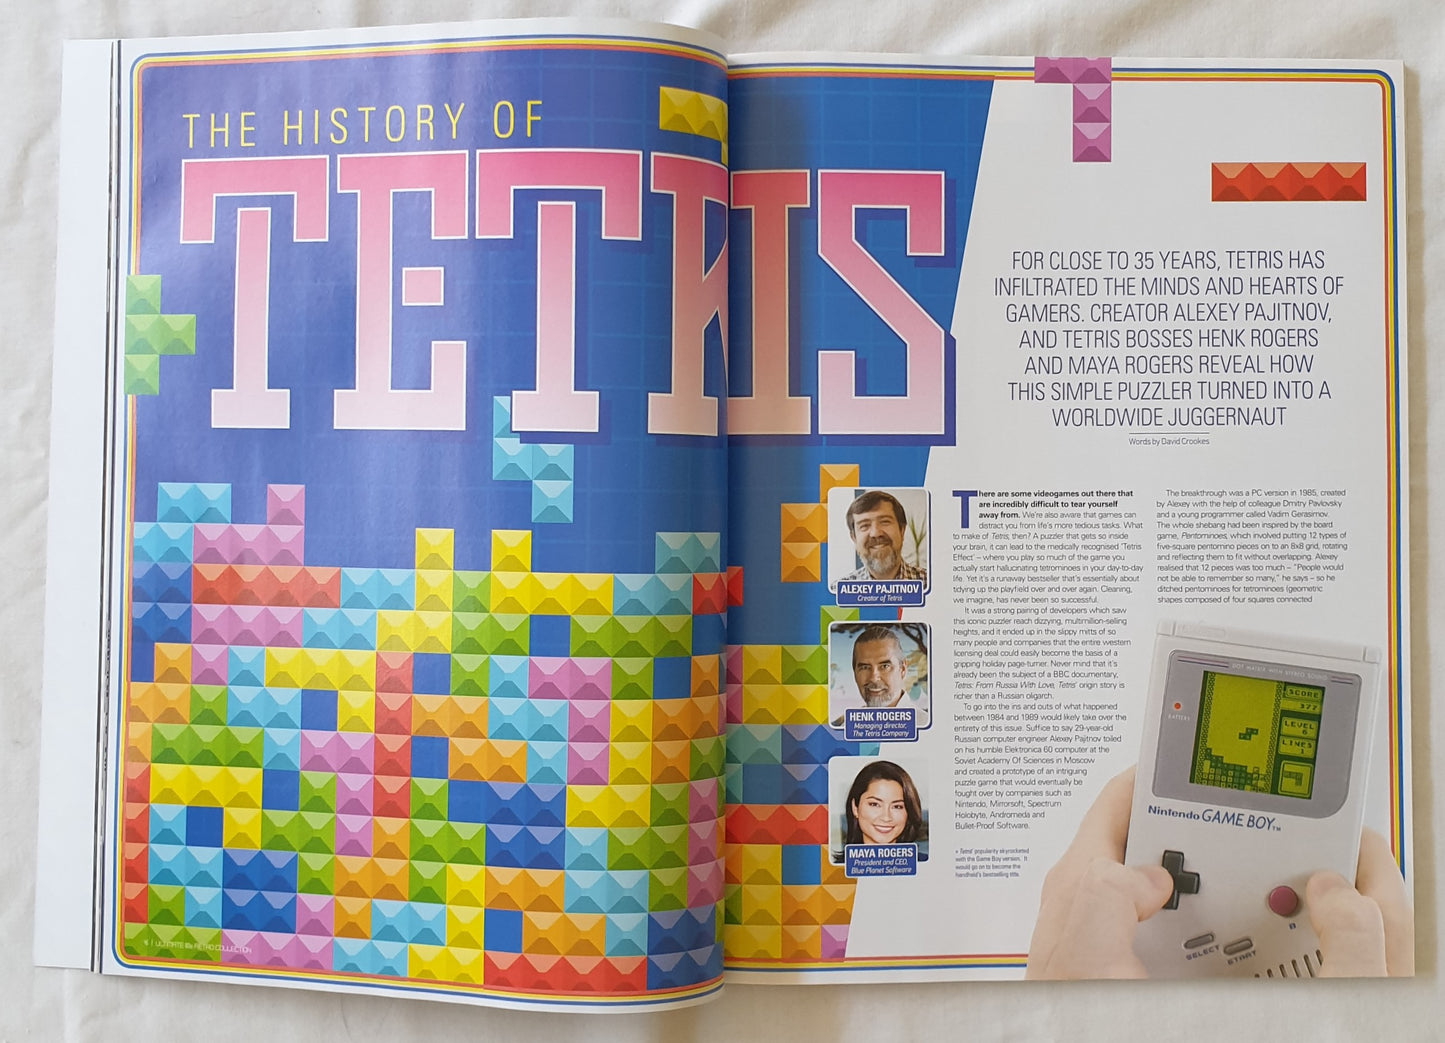 Read Ultimate 80s Retro Gaming Collection magazine on Readly - the ultimate  magazine subscription. 1000's of magazines in one app